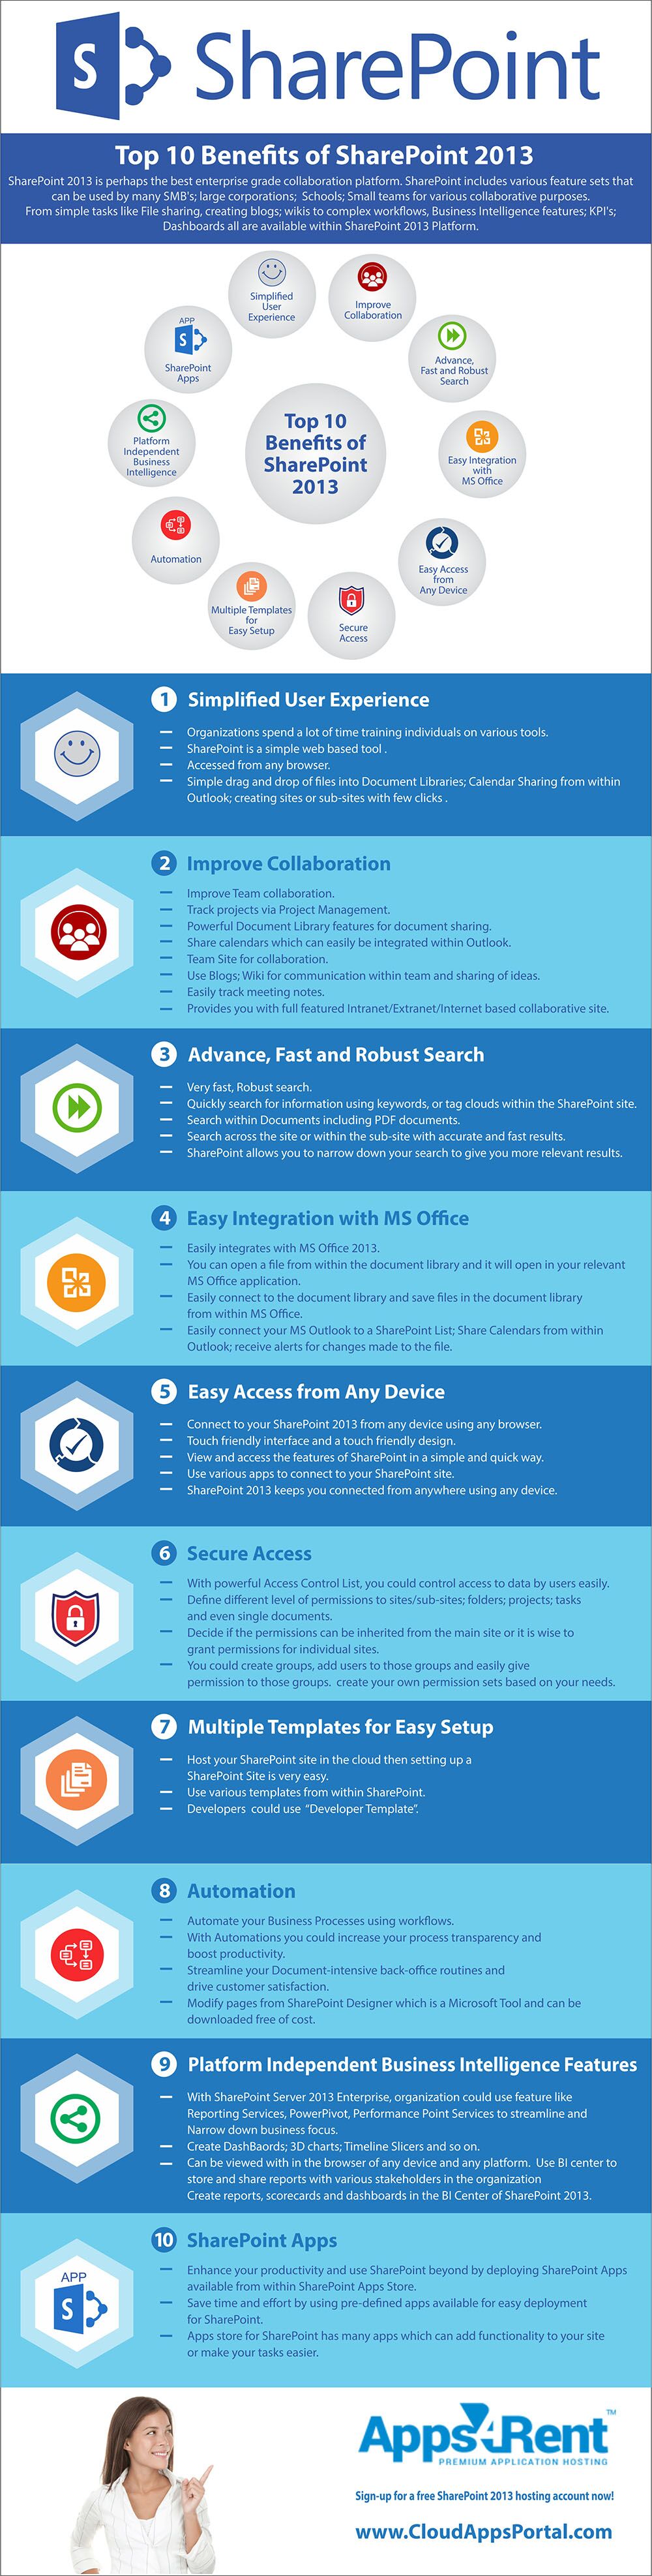 infographic - Top 10 benefits of free SharePoint 2013 hosting cloudappsportal.com